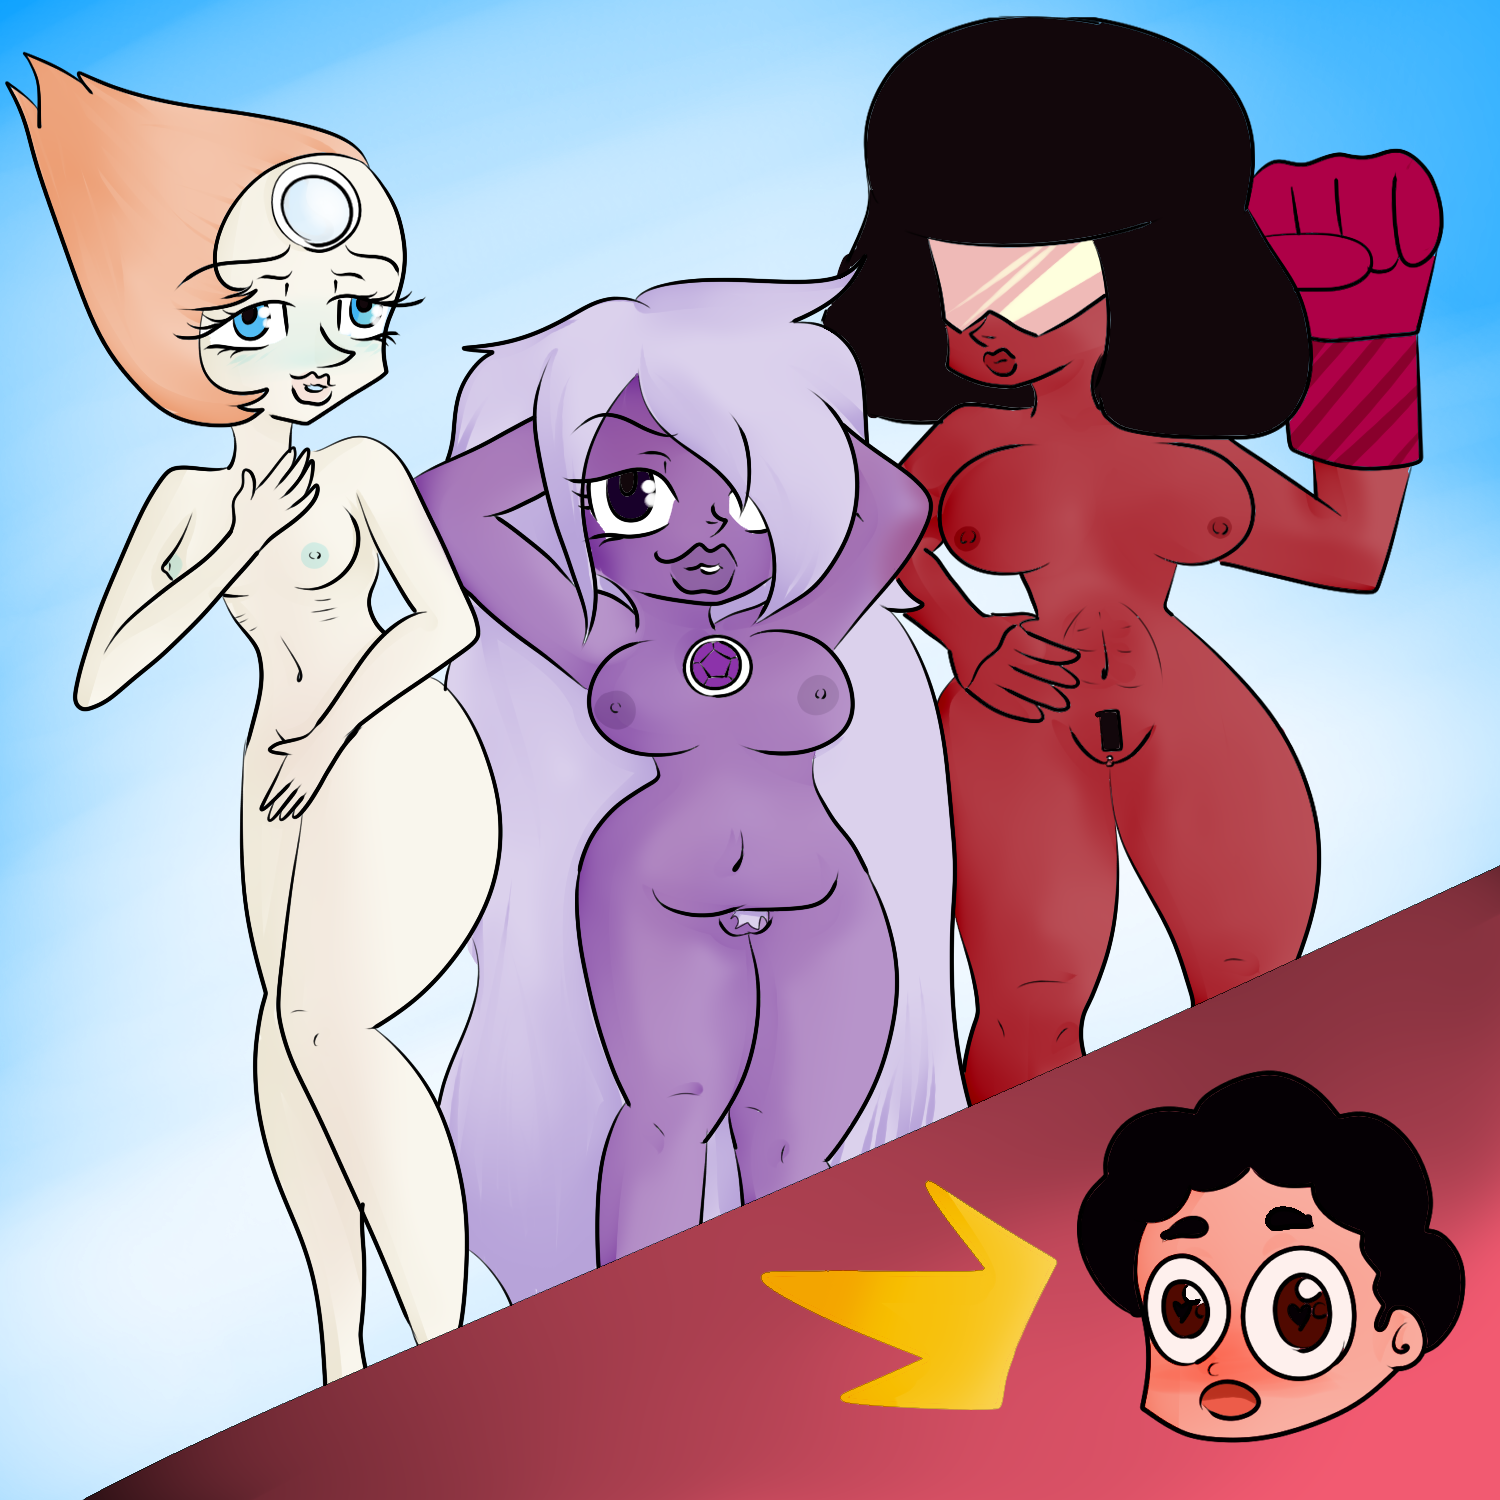 amethyst pearl or garnet which one will steven choose if they are all hot and horny